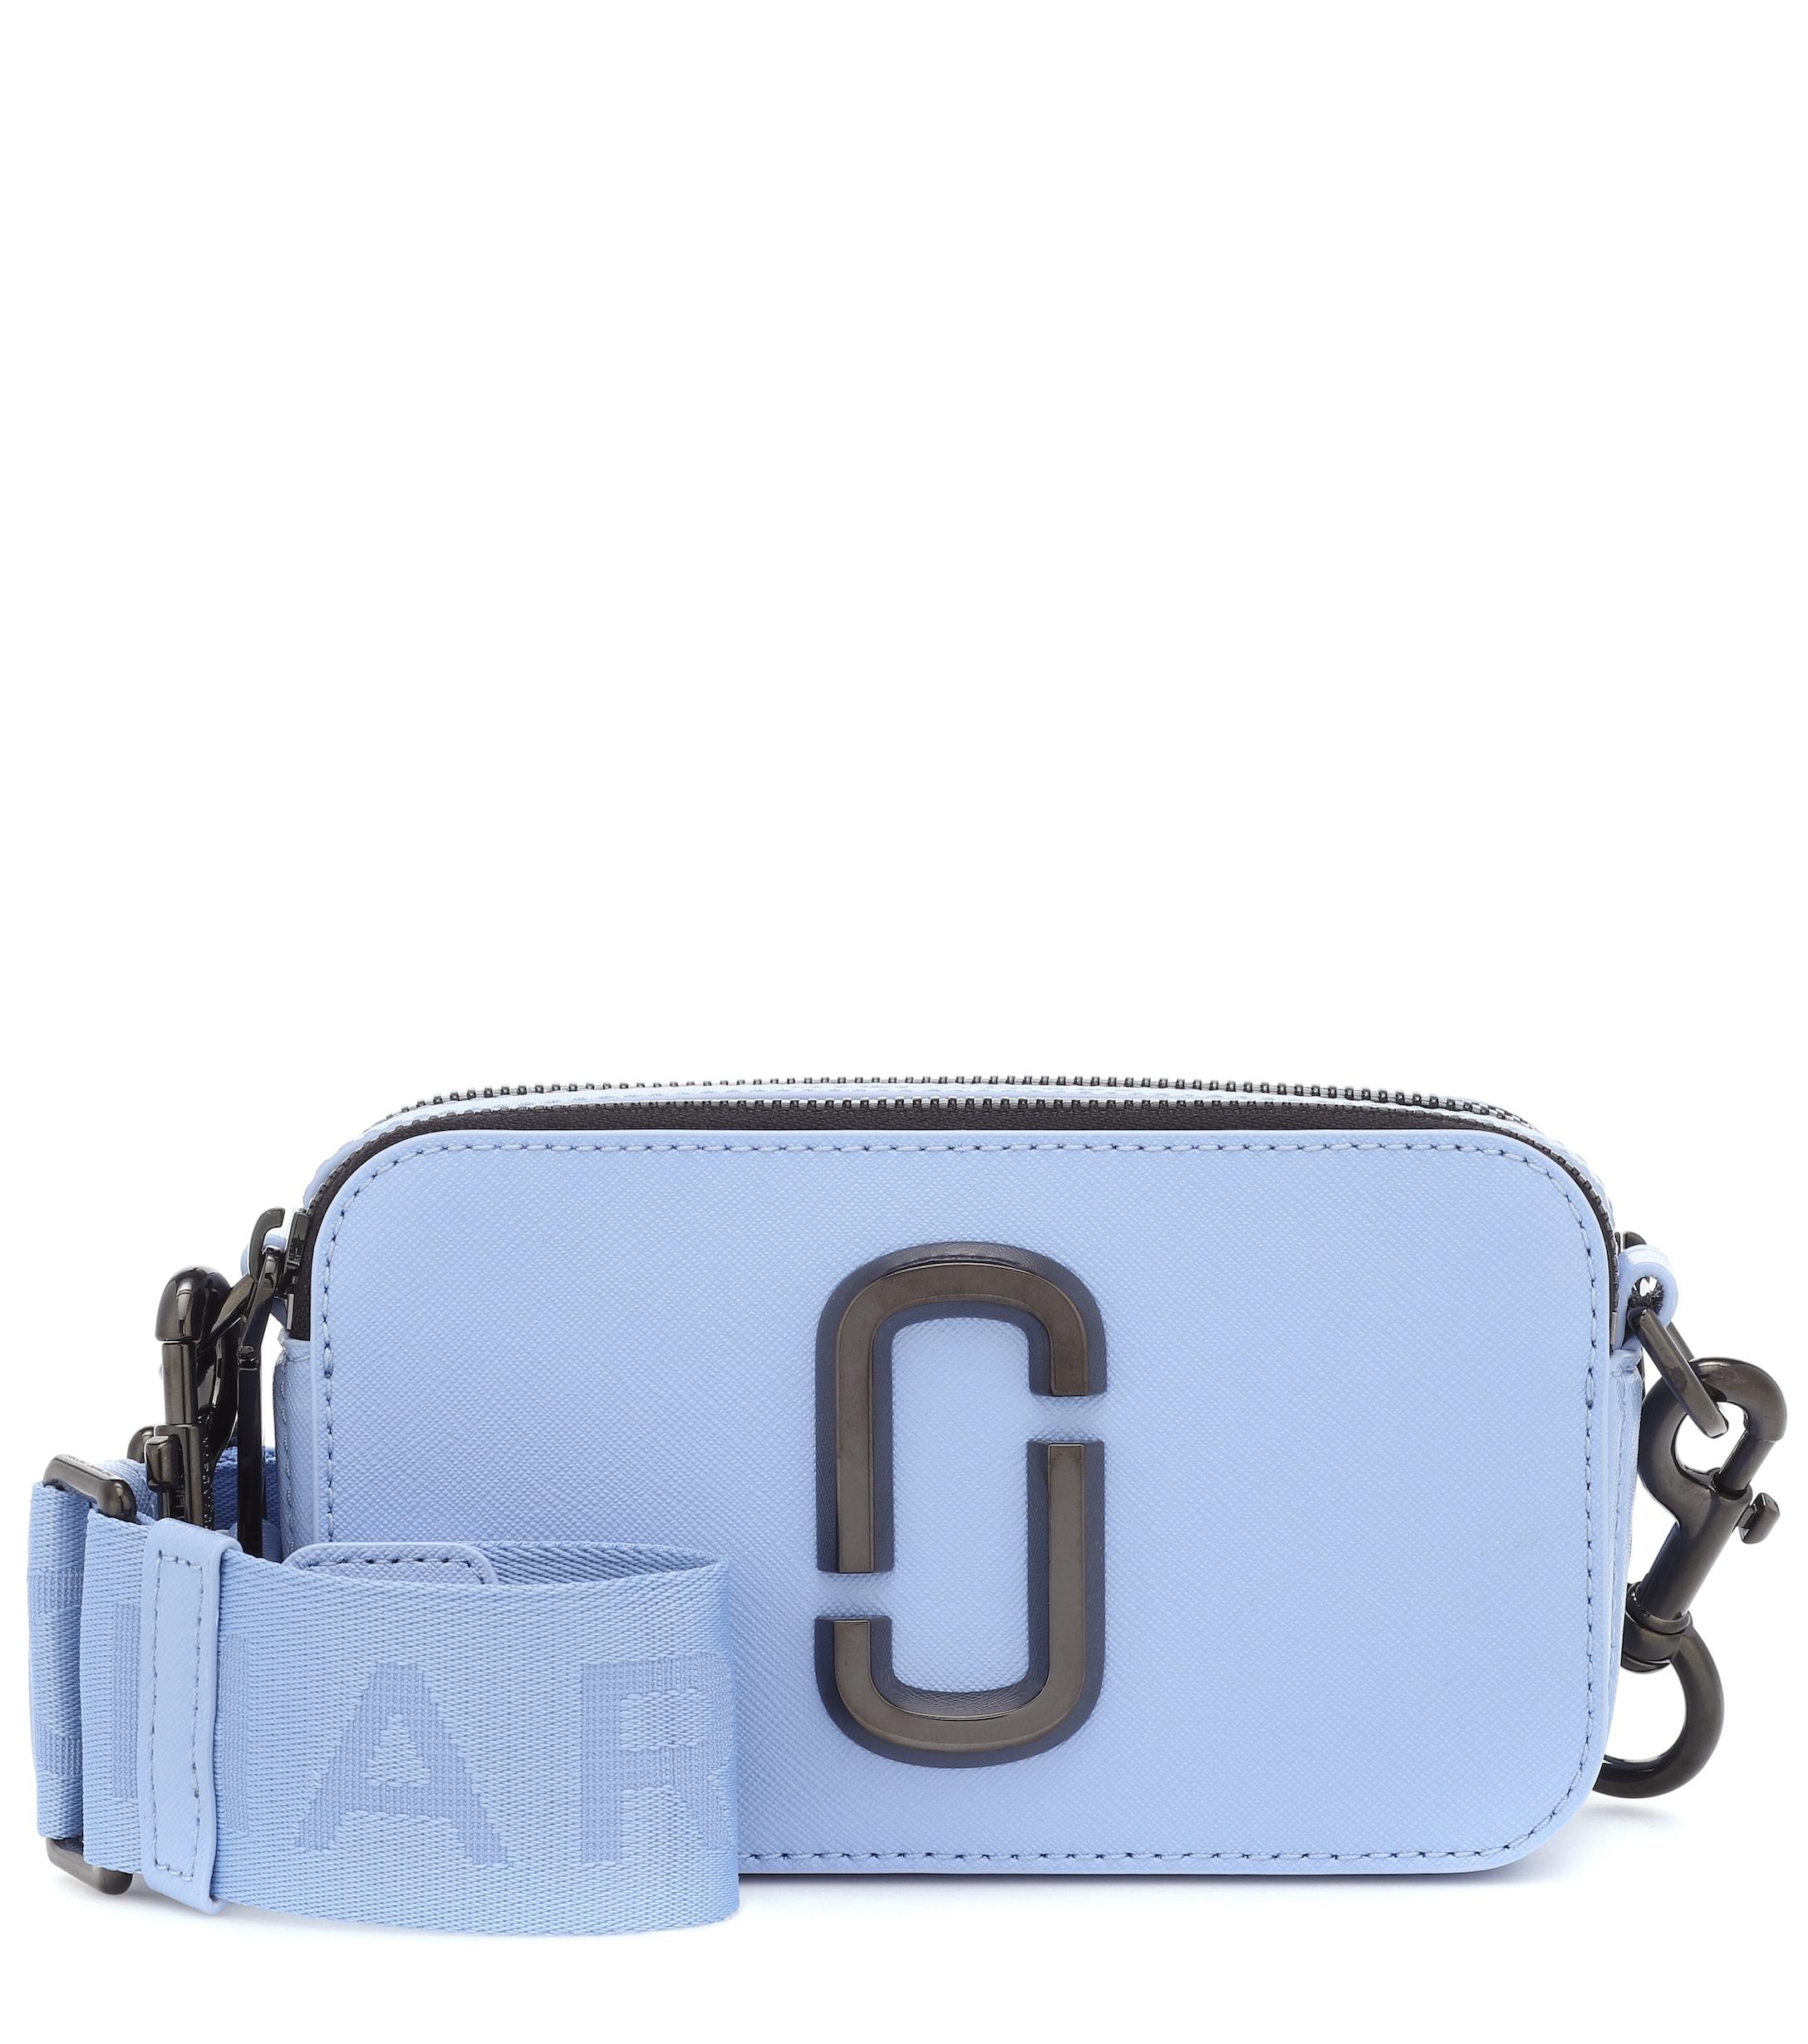 Marc Jacobs Grey And Blue Snapshot Bag